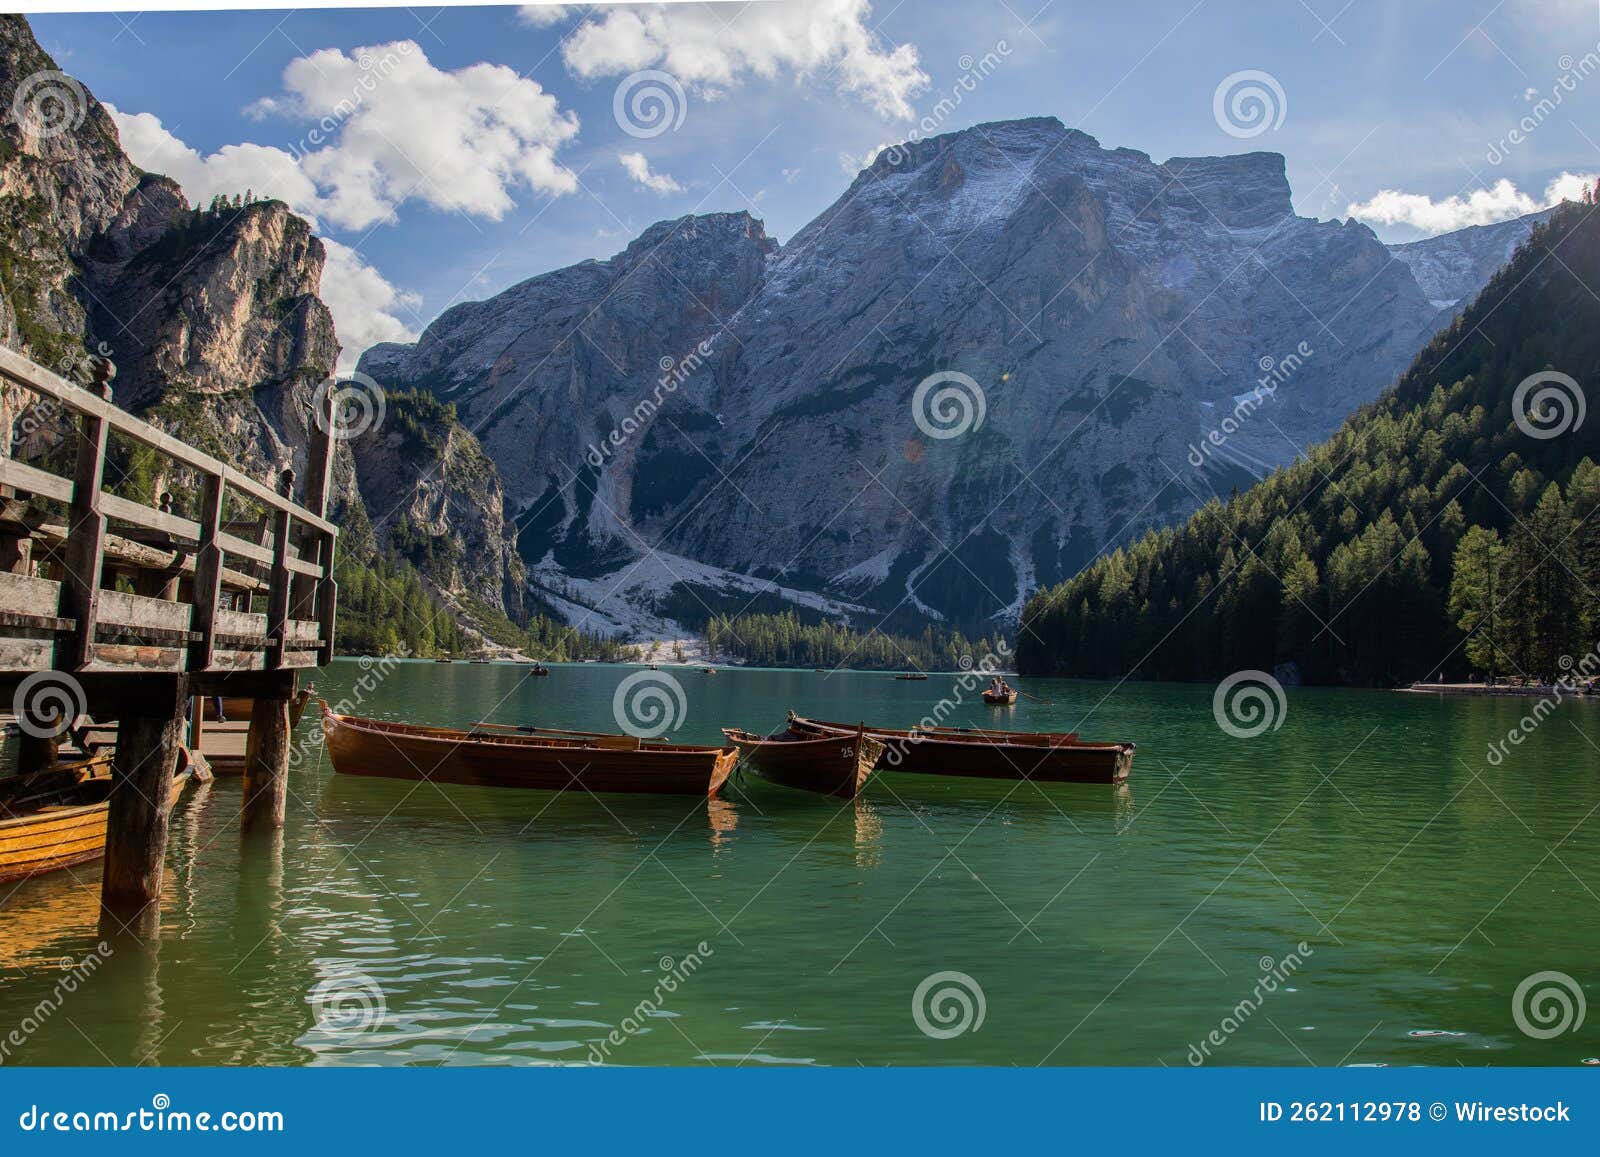 beautiful shot of a group of boats on calm water in the fanes-sennes-braies nature park in italy